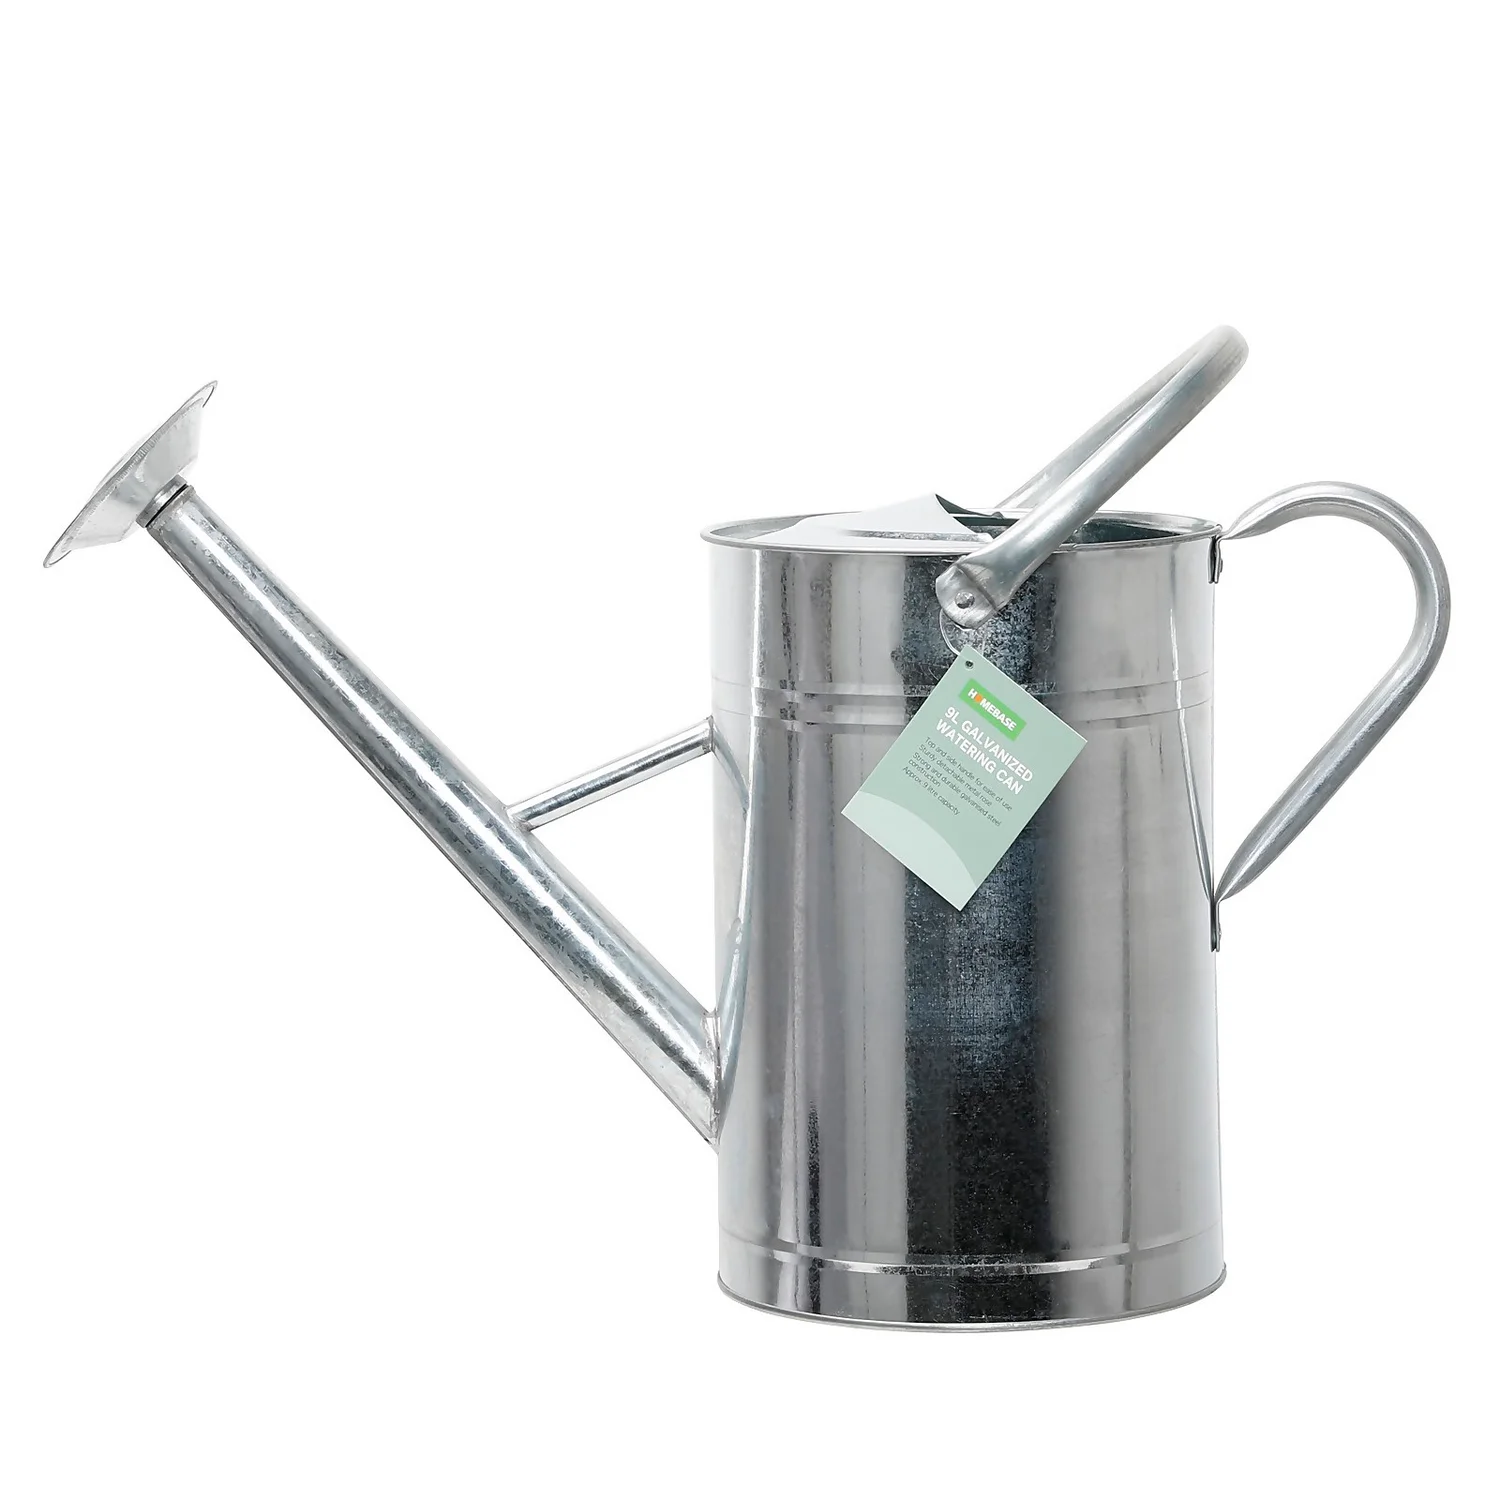 Image of Save: &pound4.50: Homebase Galvanised Watering Can - 9L
